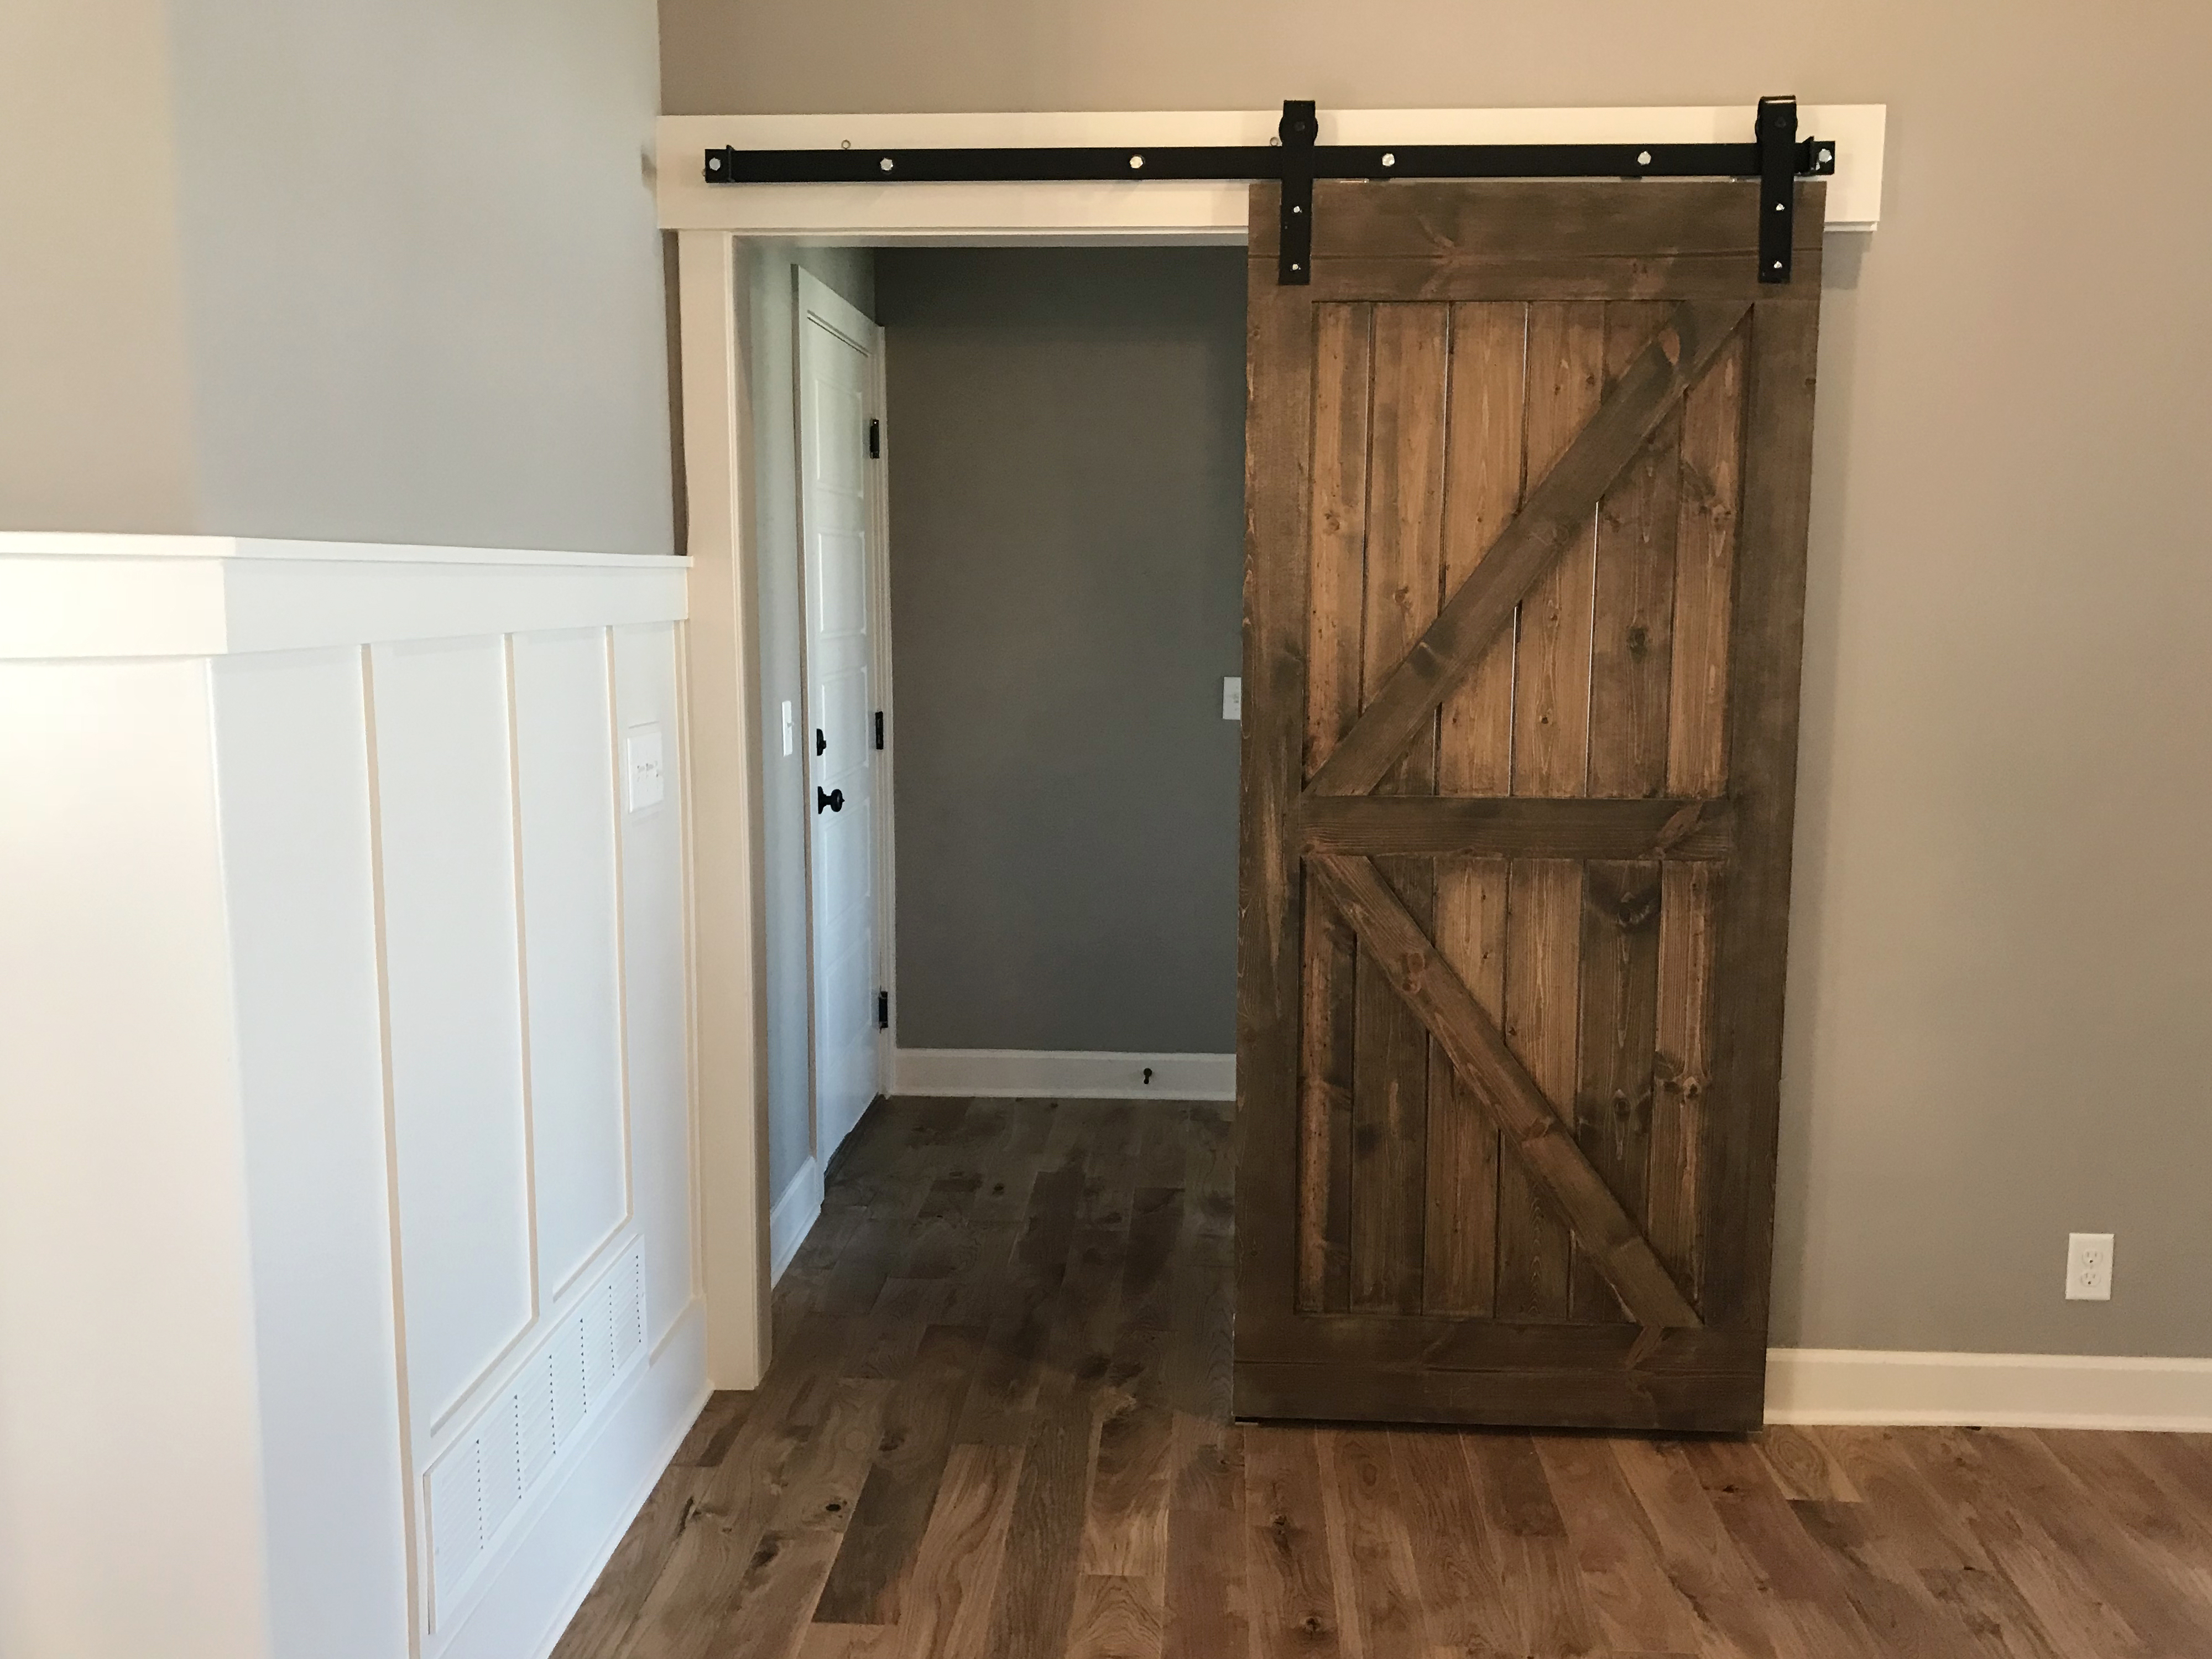 Sliding barn door in a modern home interior, partially open to reveal an adjoining room